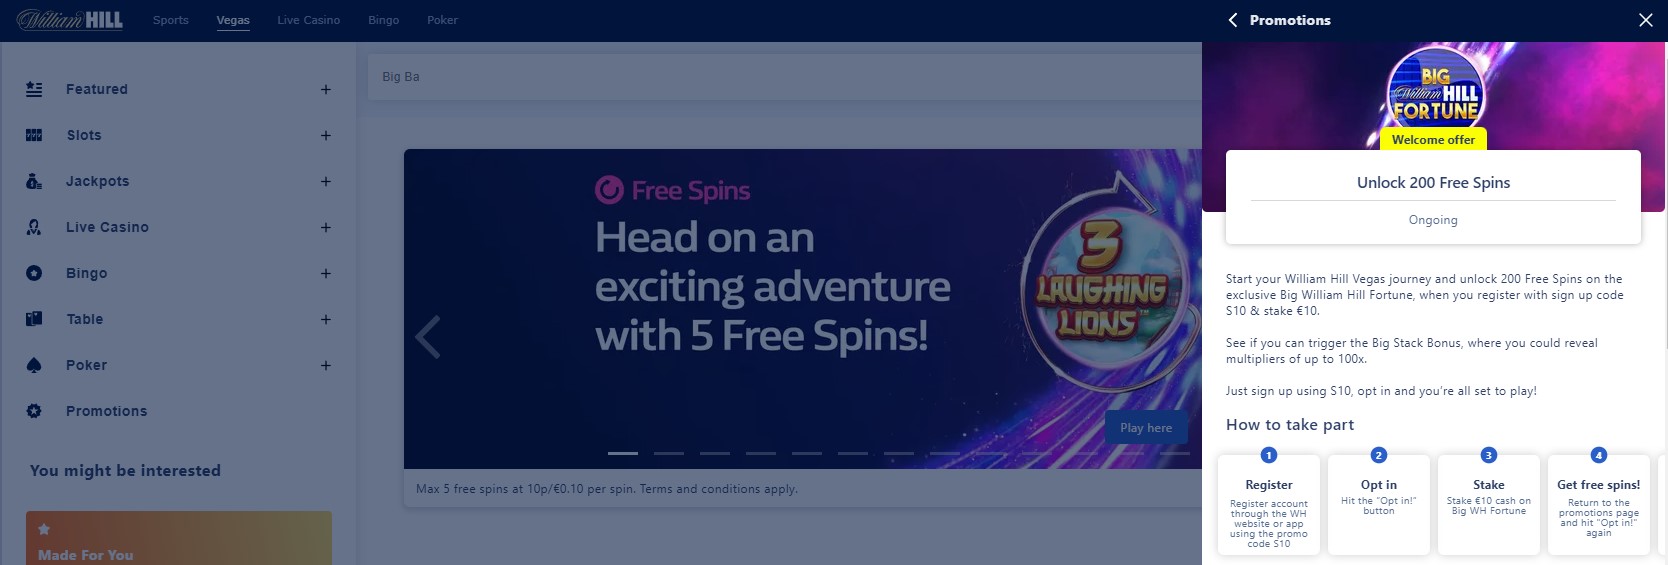 200 free spins at williamhill